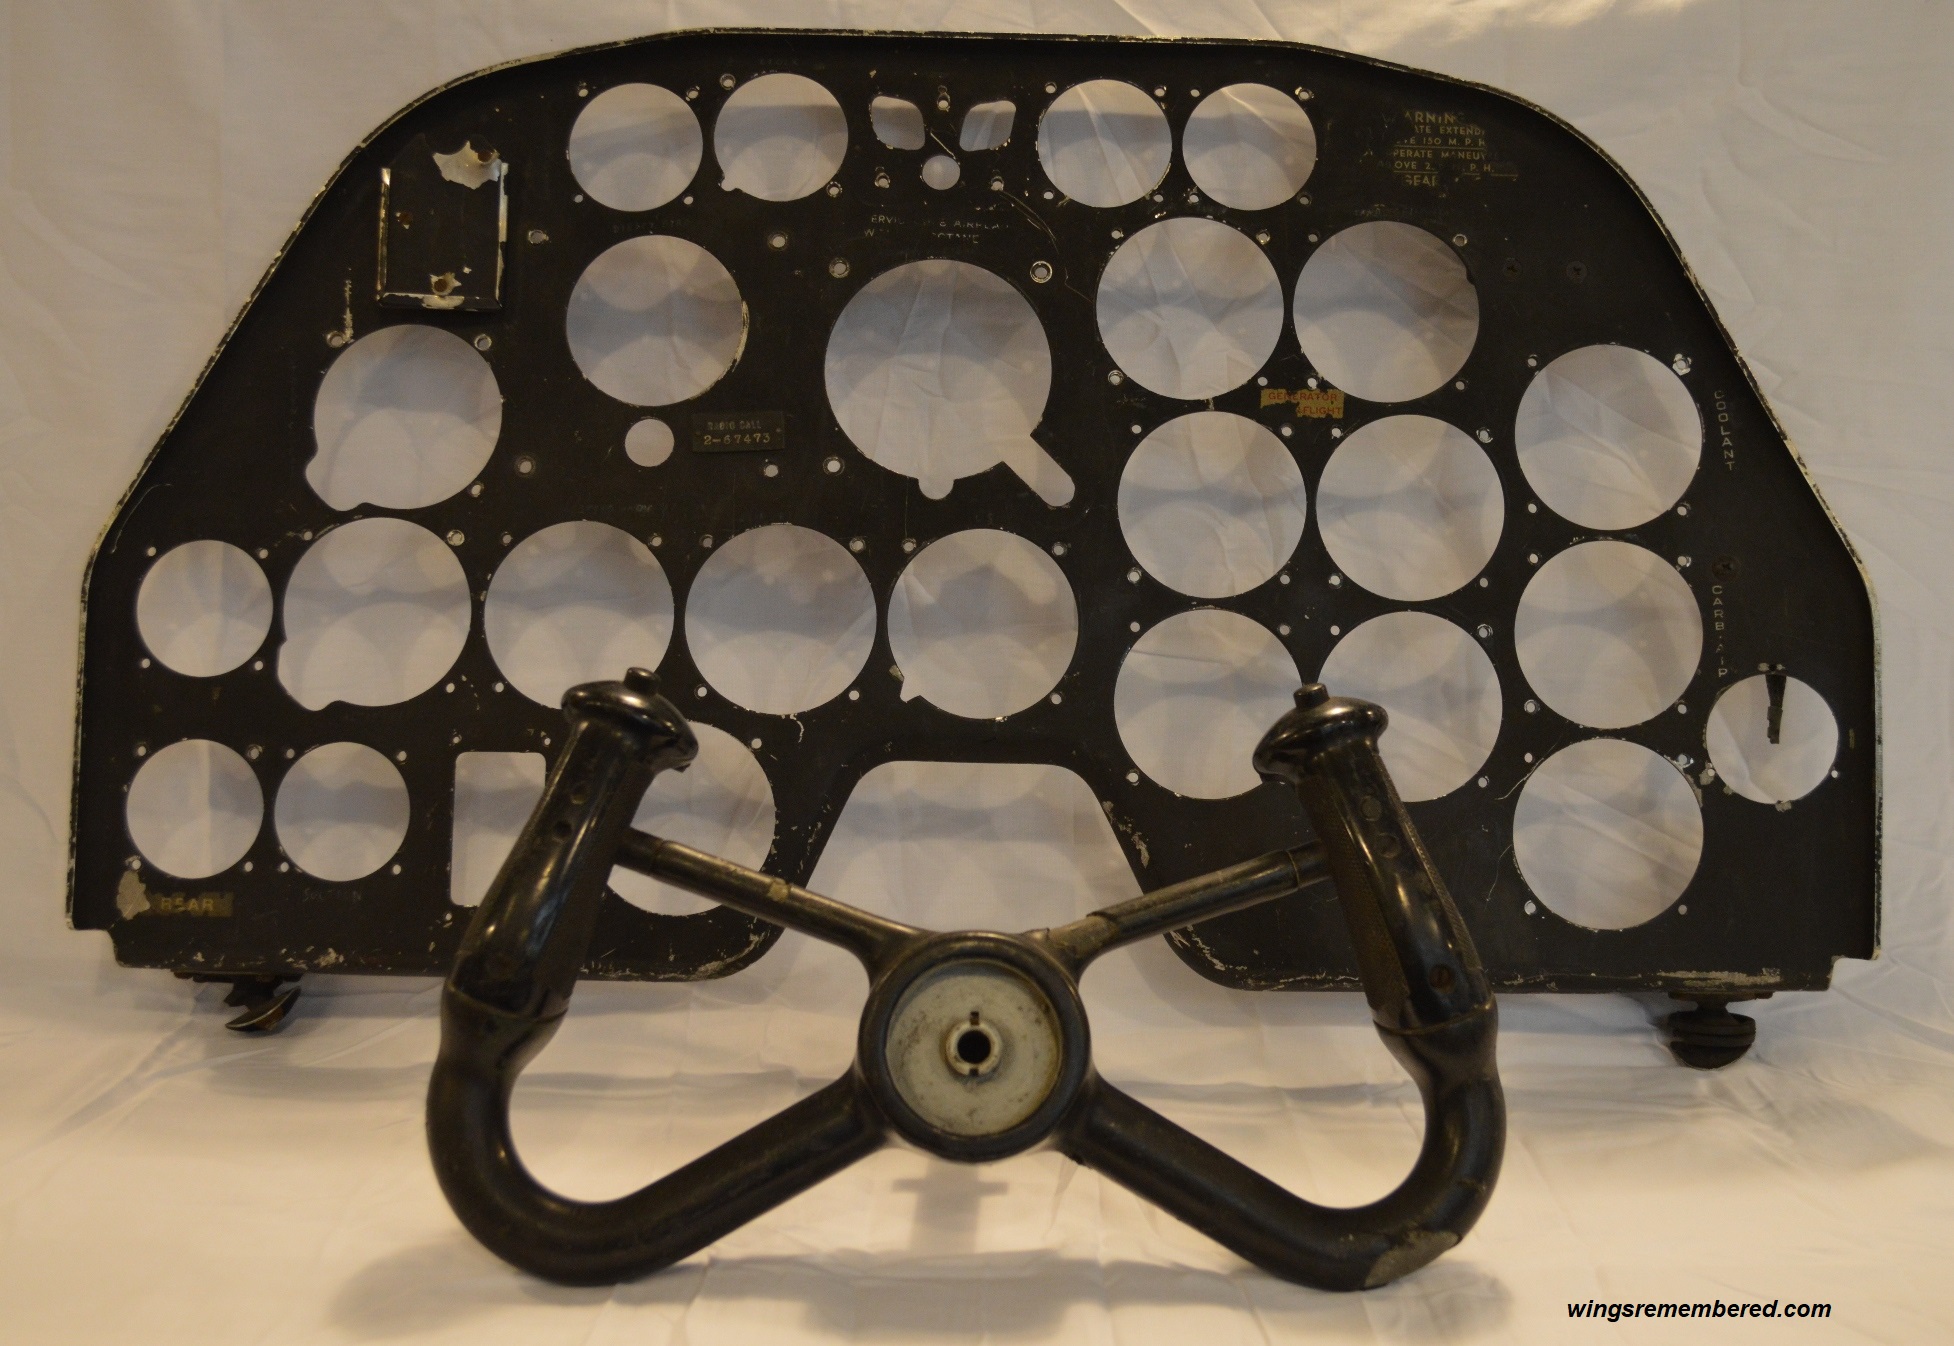 Panel and Control Wheel from Jacks P 38